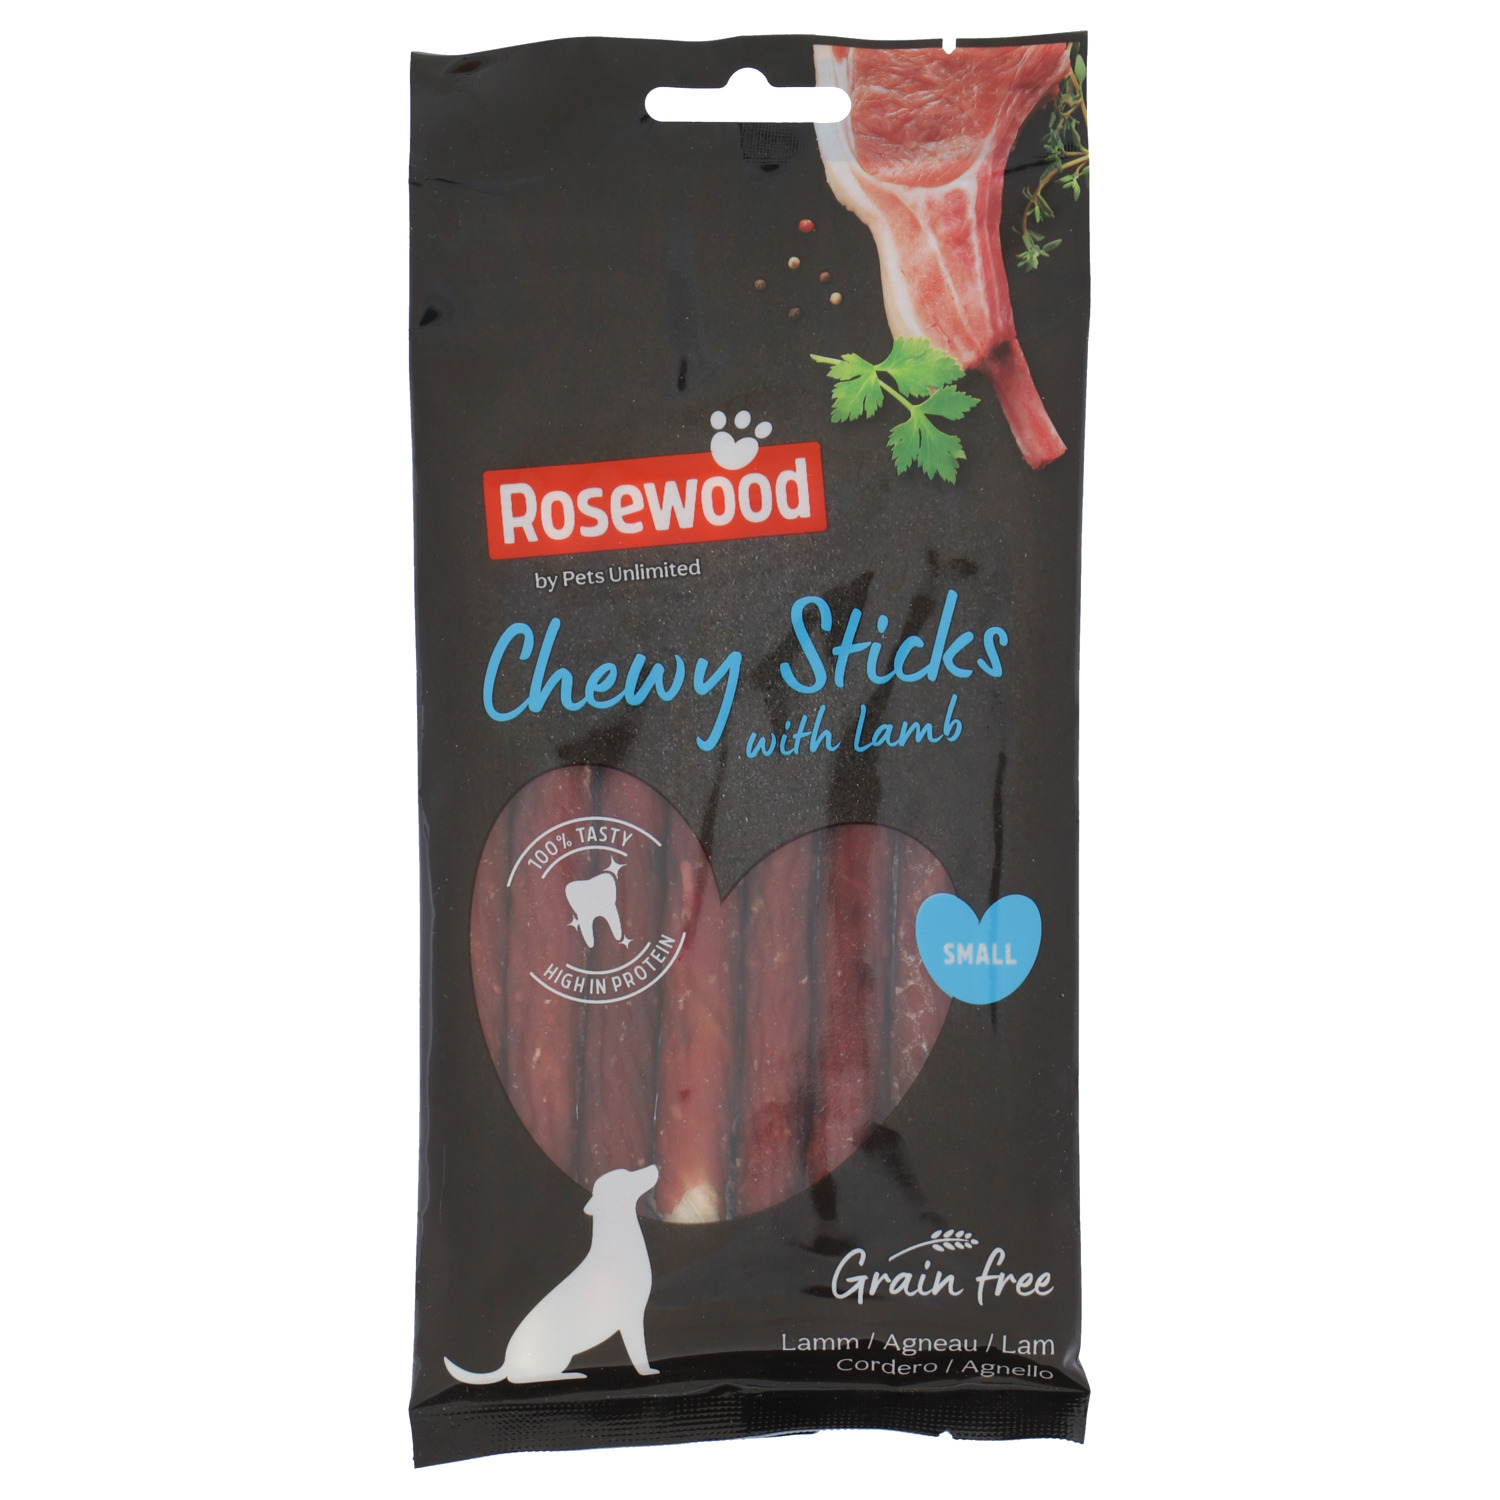 Rosewood Chewy Sticks Lamb S 72g